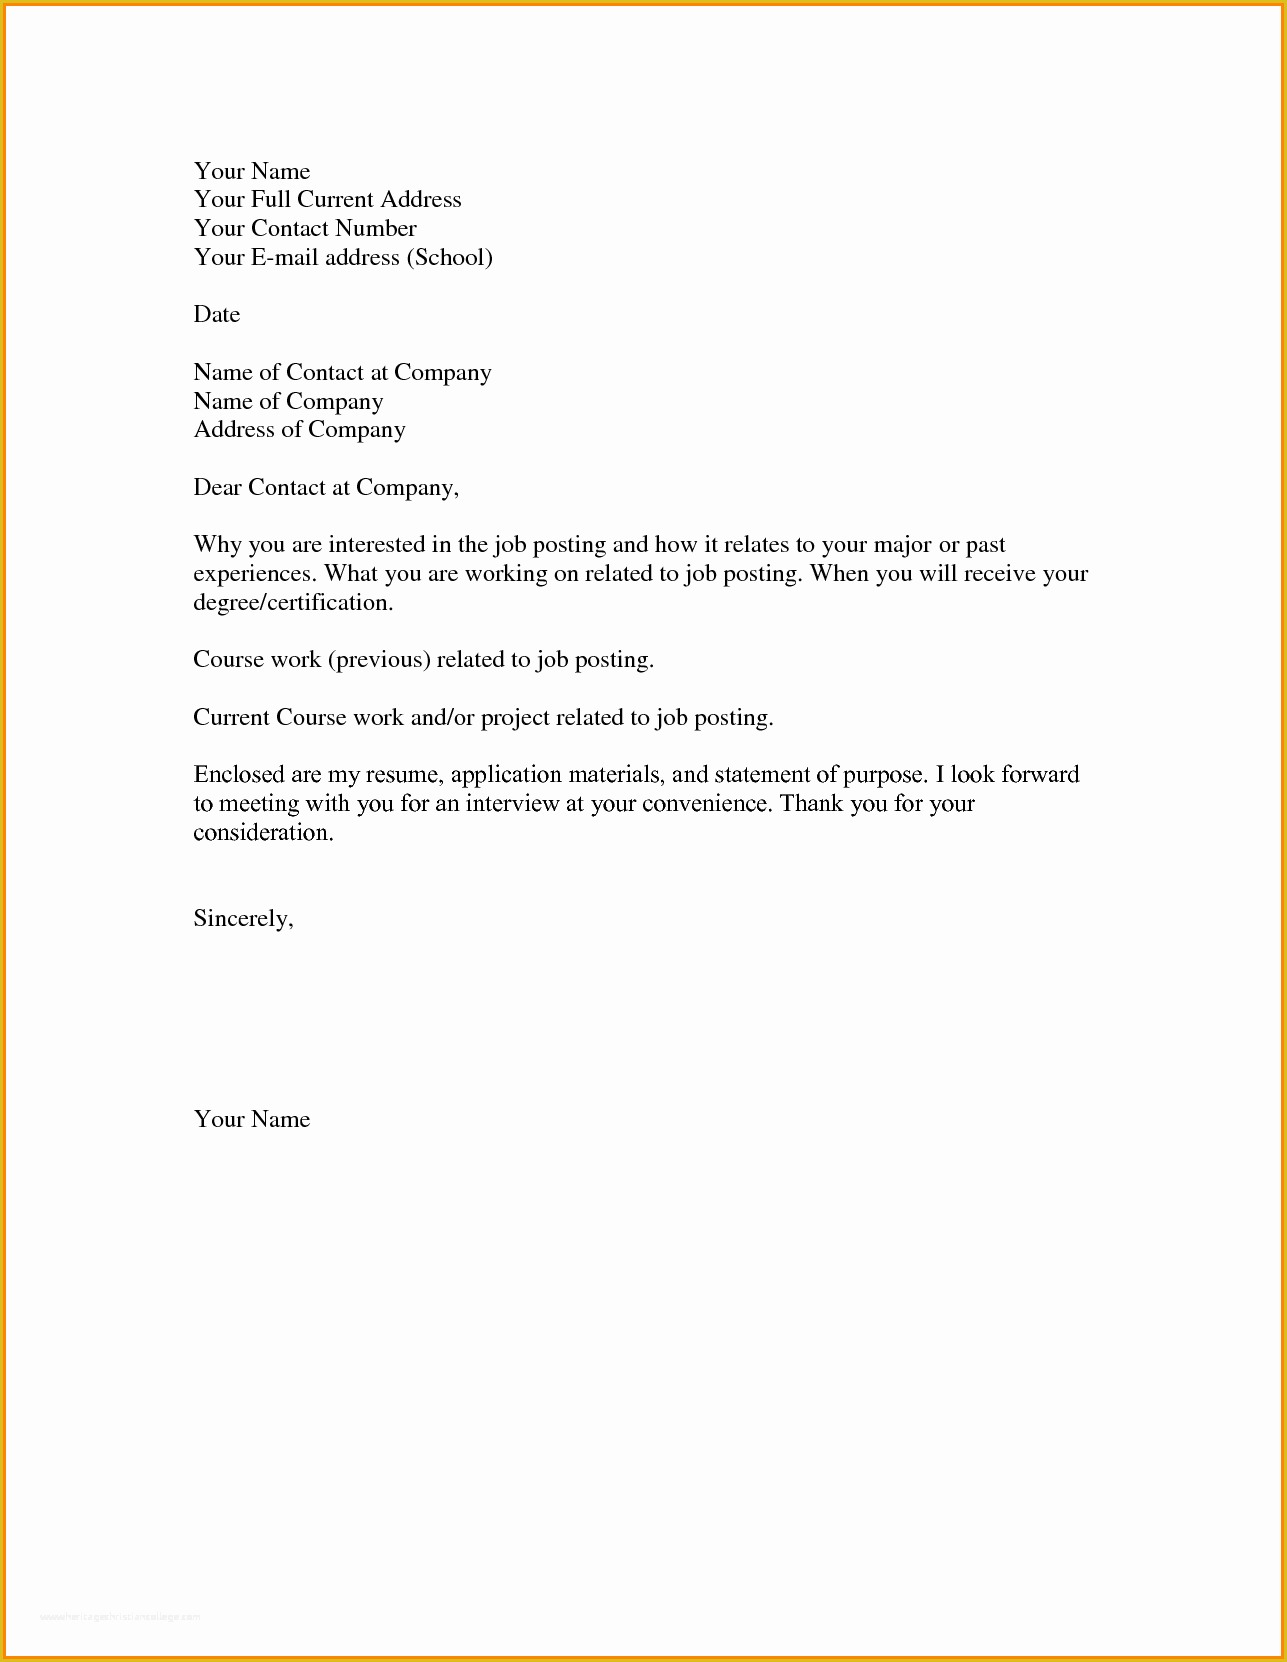 Simple Cover Letter Template Free Of 8 Example Of A Simple Applicatuon Letter